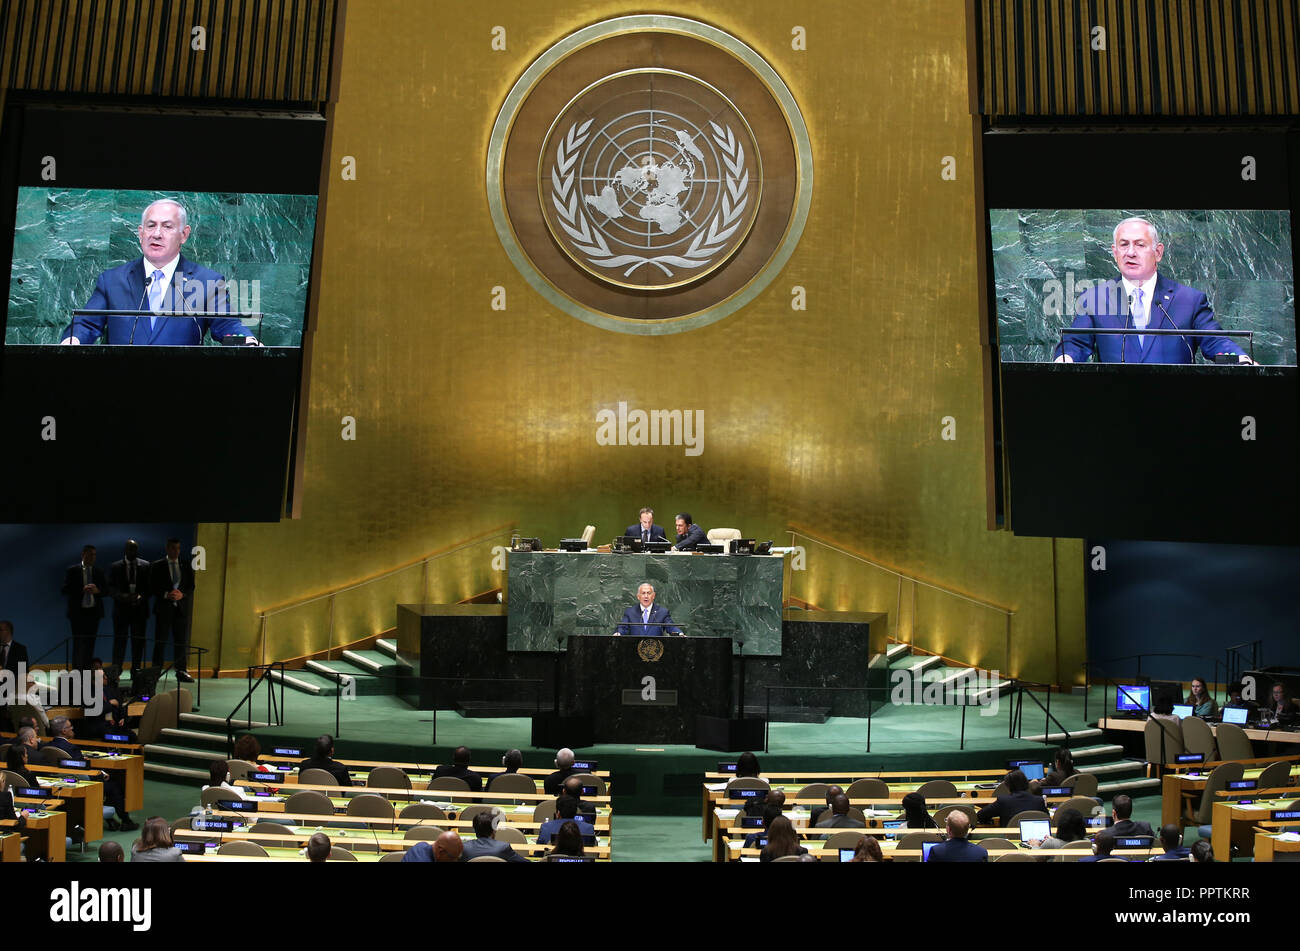 (180927) -- UNITED NATIONS, Sept. 27, 2018 (Xinhua) -- Israeli Prime Minister Benjamin Netanyahu addresses the General Debate of the 73rd session of the United Nations General Assembly at the UN headquarters in New York, on Sept. 27, 2018. (Xinhua/Qin Lang) Stock Photo